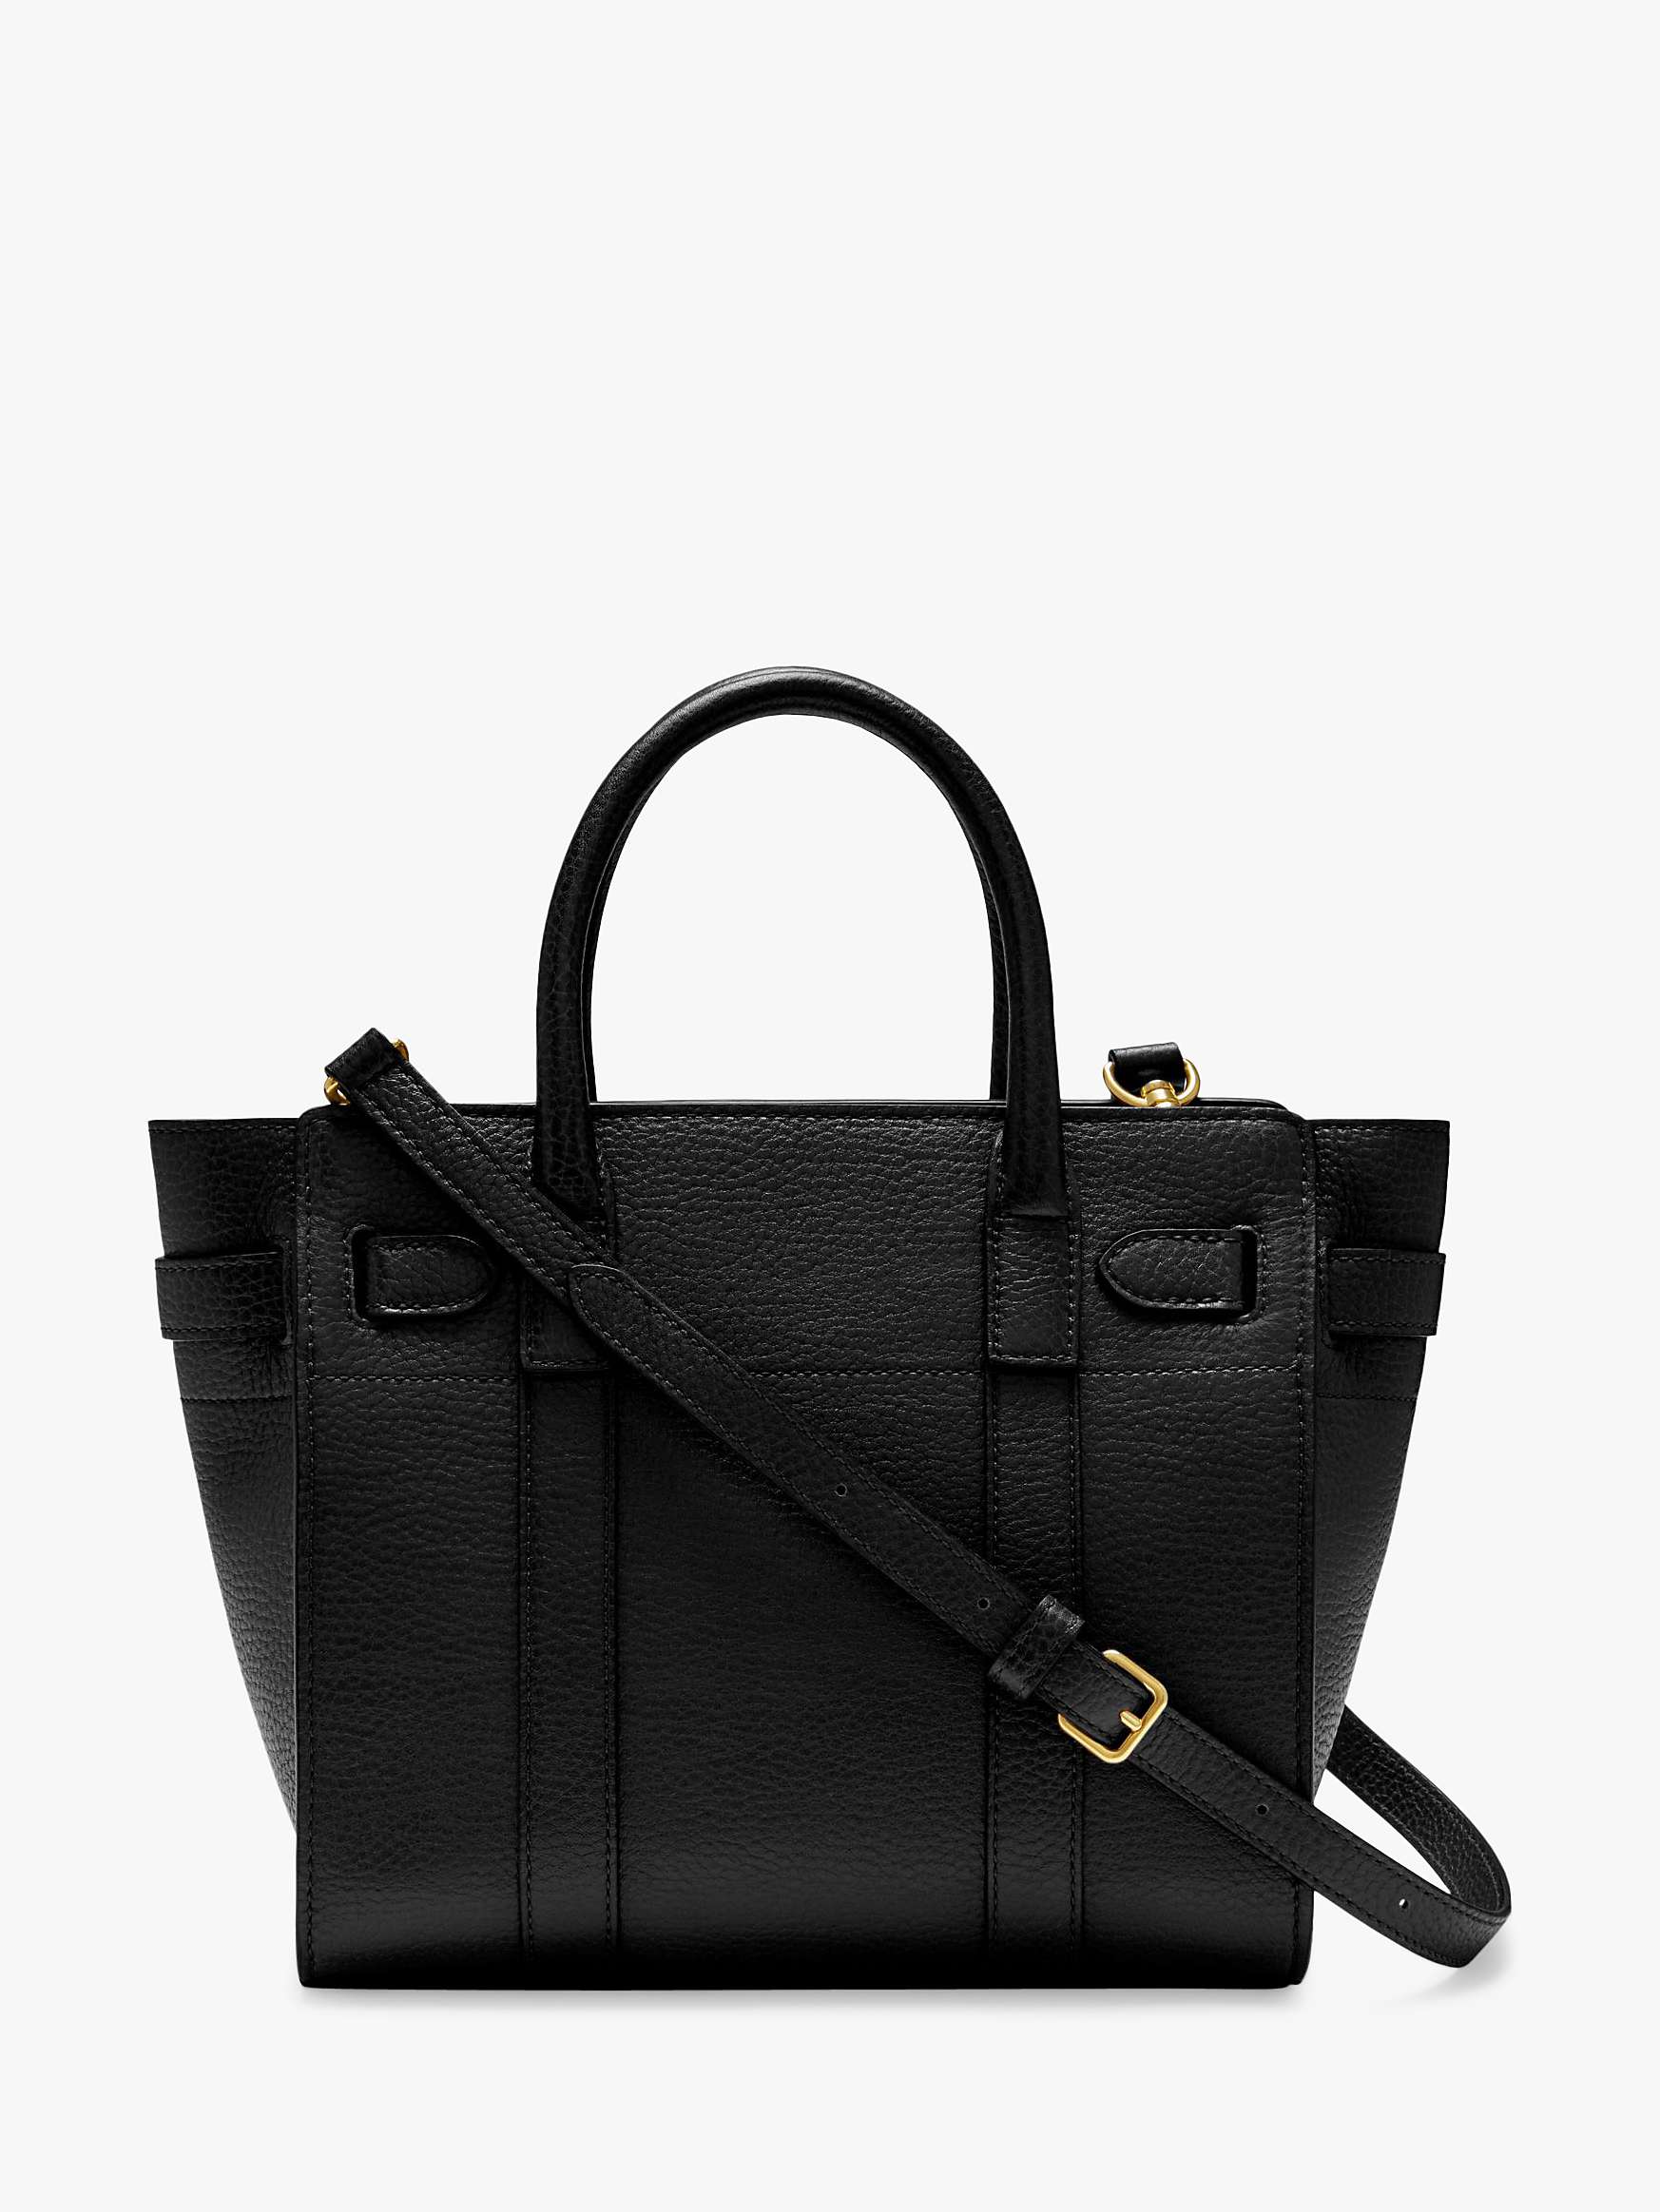 Buy Mulberry Mini Bayswater Zipped Classic Grain Leather Tote Bag Online at johnlewis.com